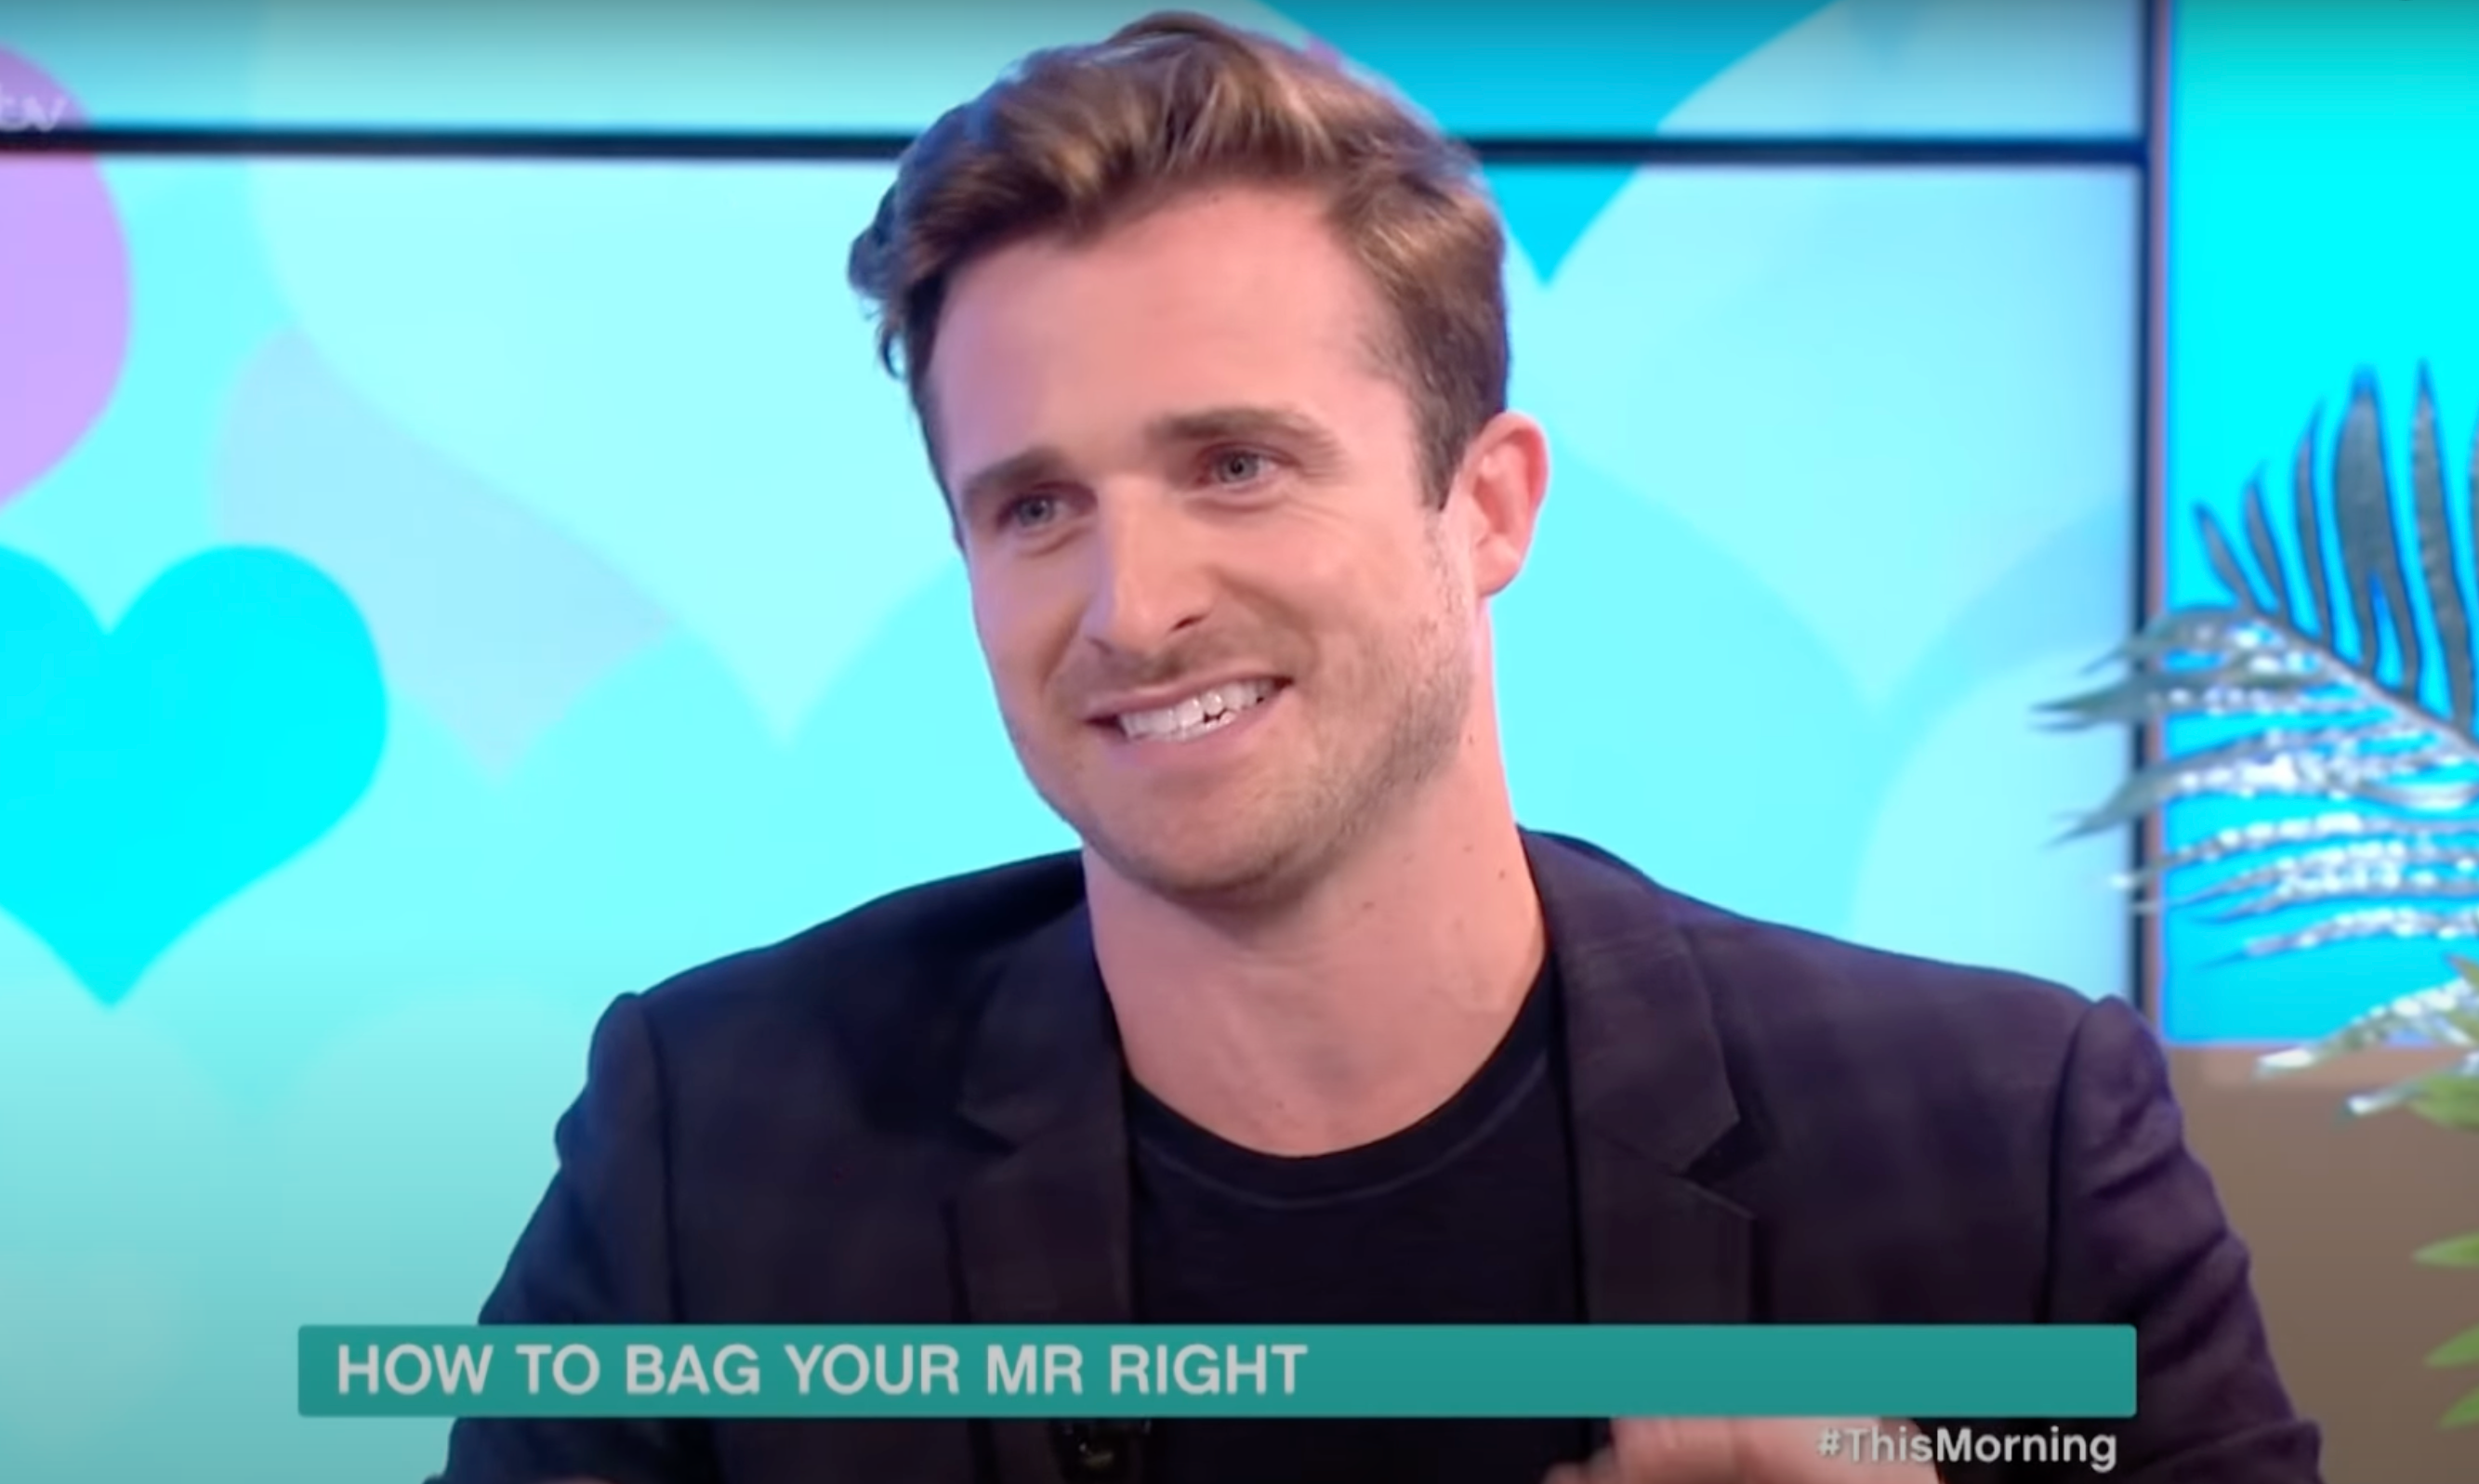 Matthew Hussey has made several appearances on ITV’s ‘This Morning’ to offer viewers dating advice and insights